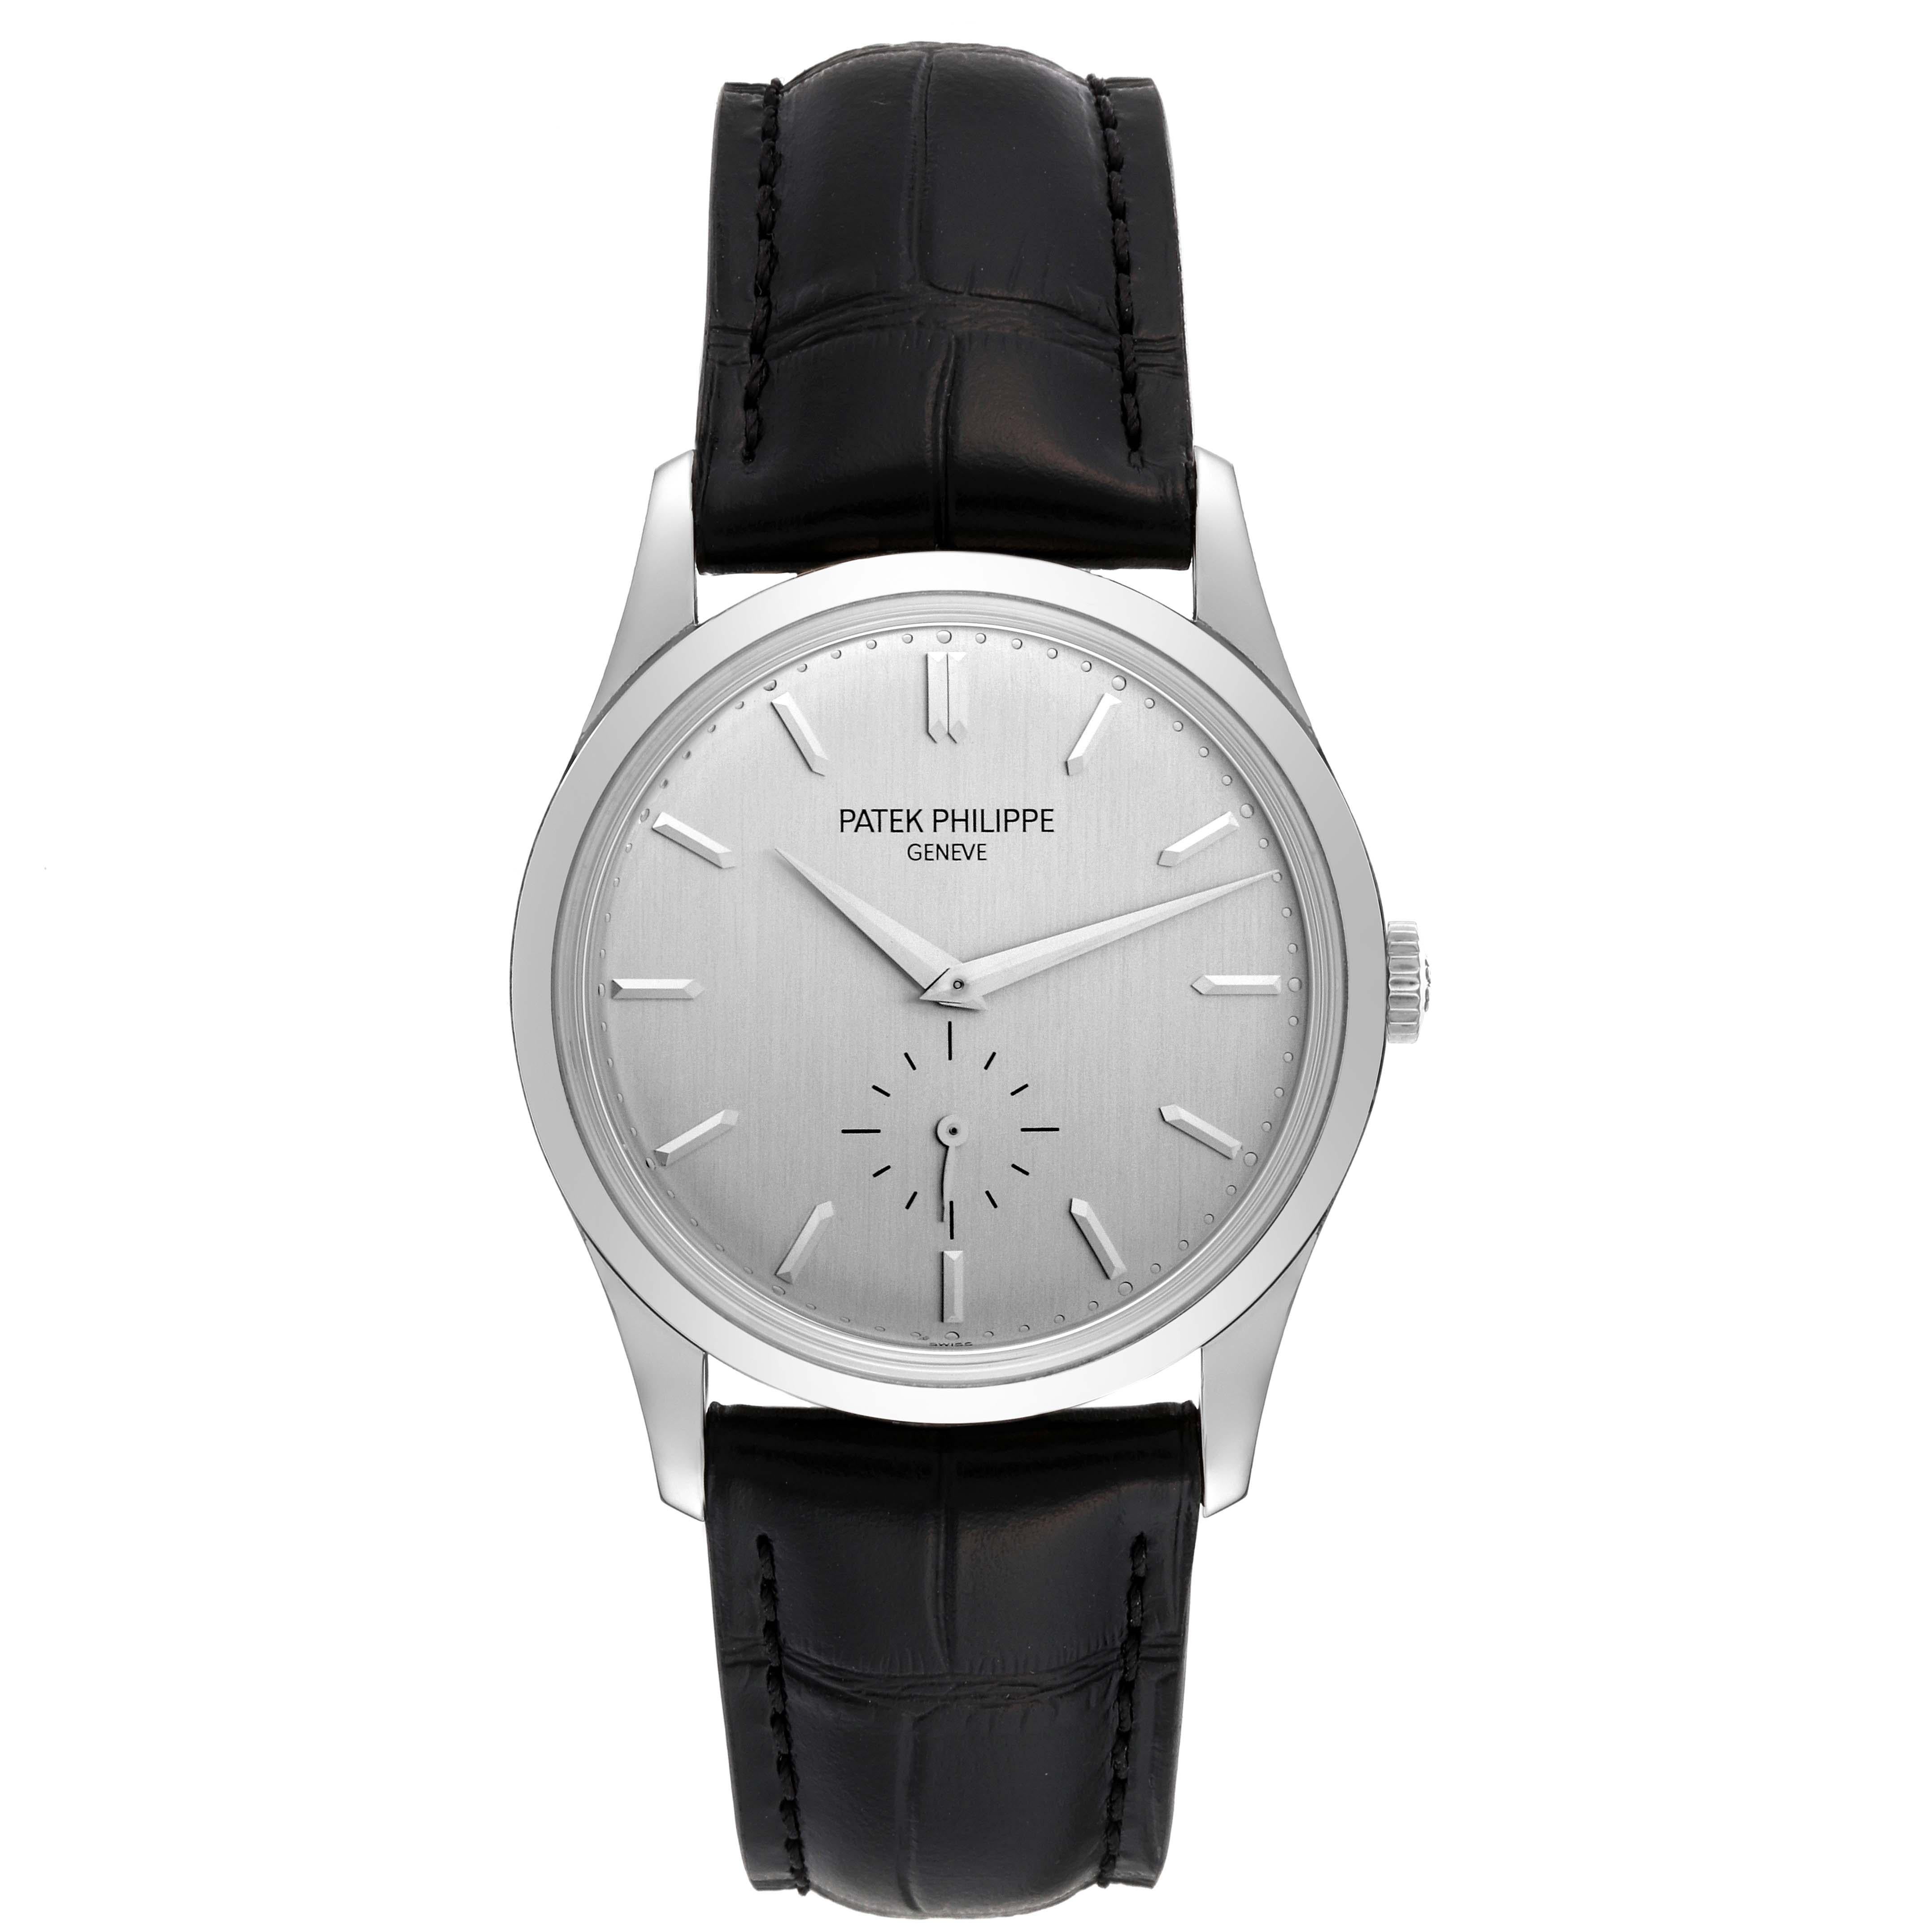 Patek Philippe Calatrava White Gold Mechanical Mens Watch 5196G In Excellent Condition For Sale In Atlanta, GA